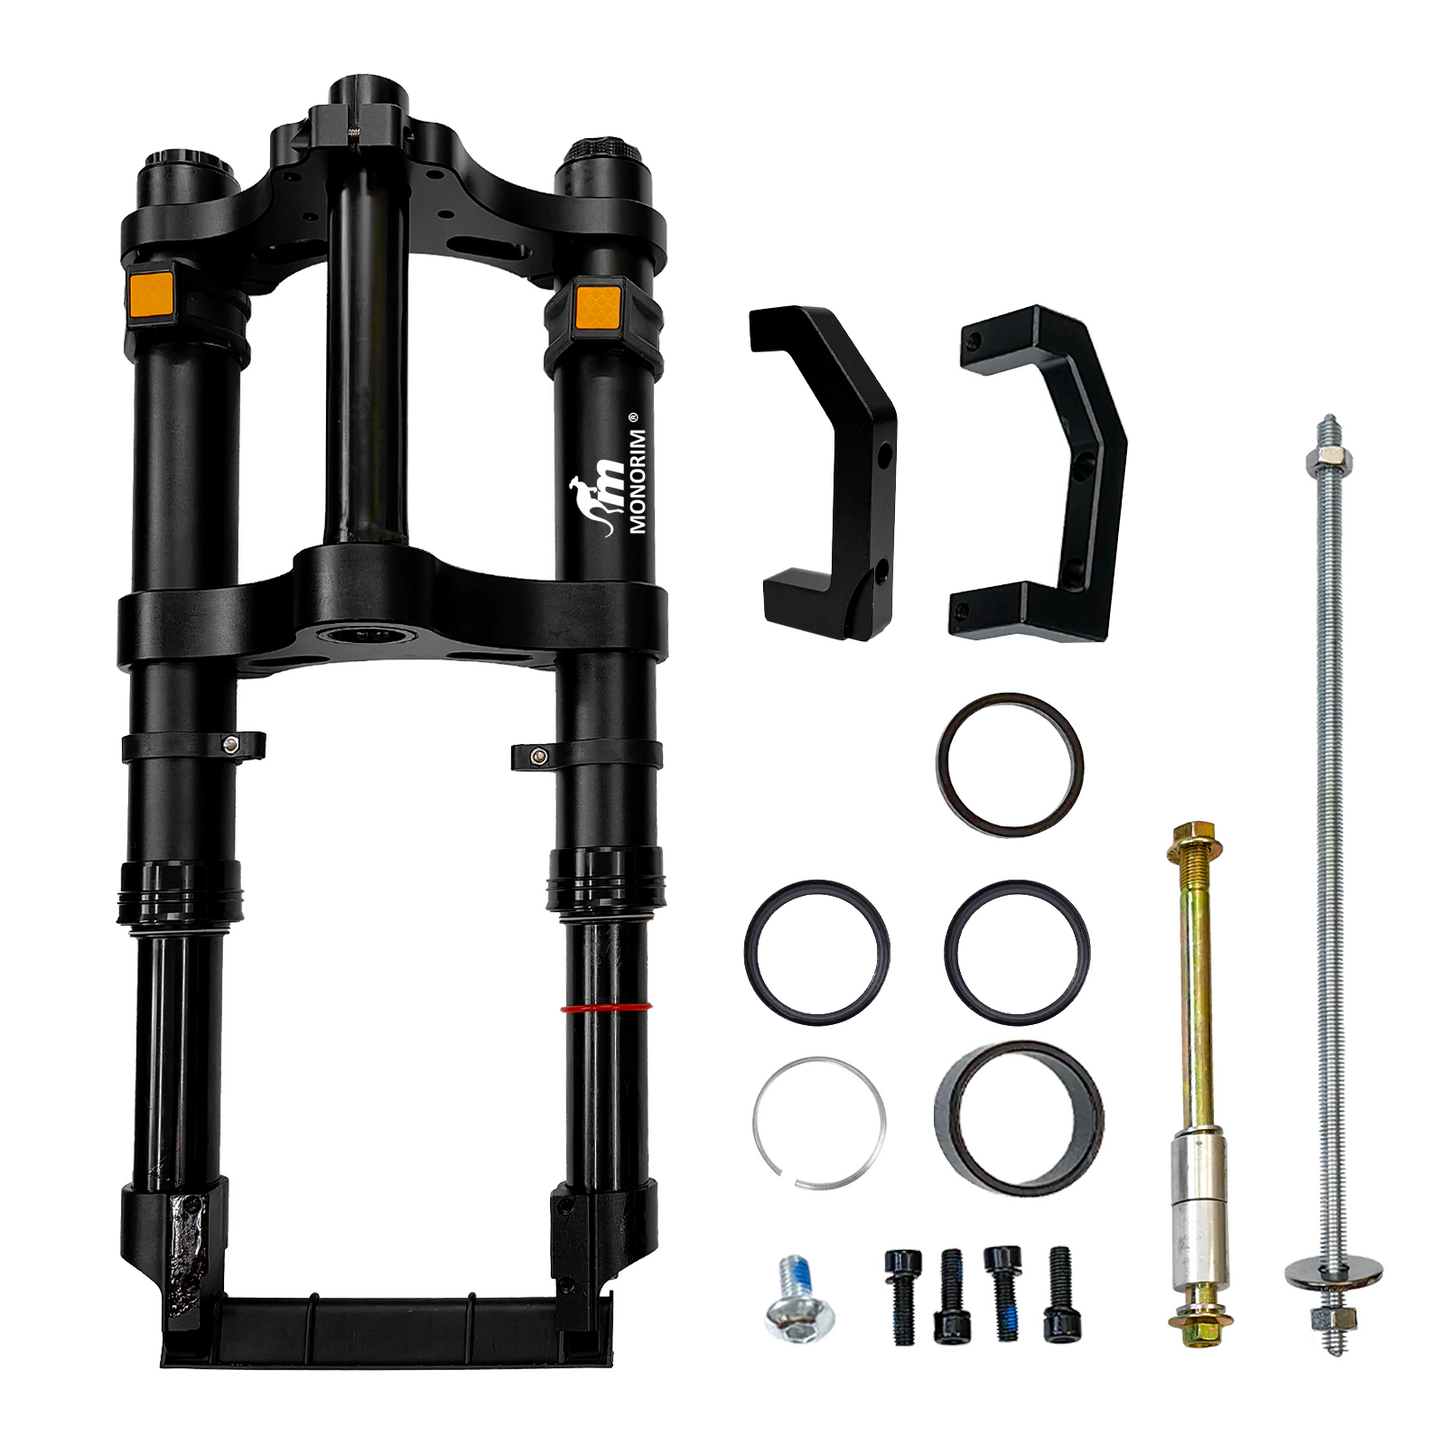 Monorim MB0-12inch front air suspension modify great kit to be more safety and comfort for FIIDO Q1/ Q1S ebike